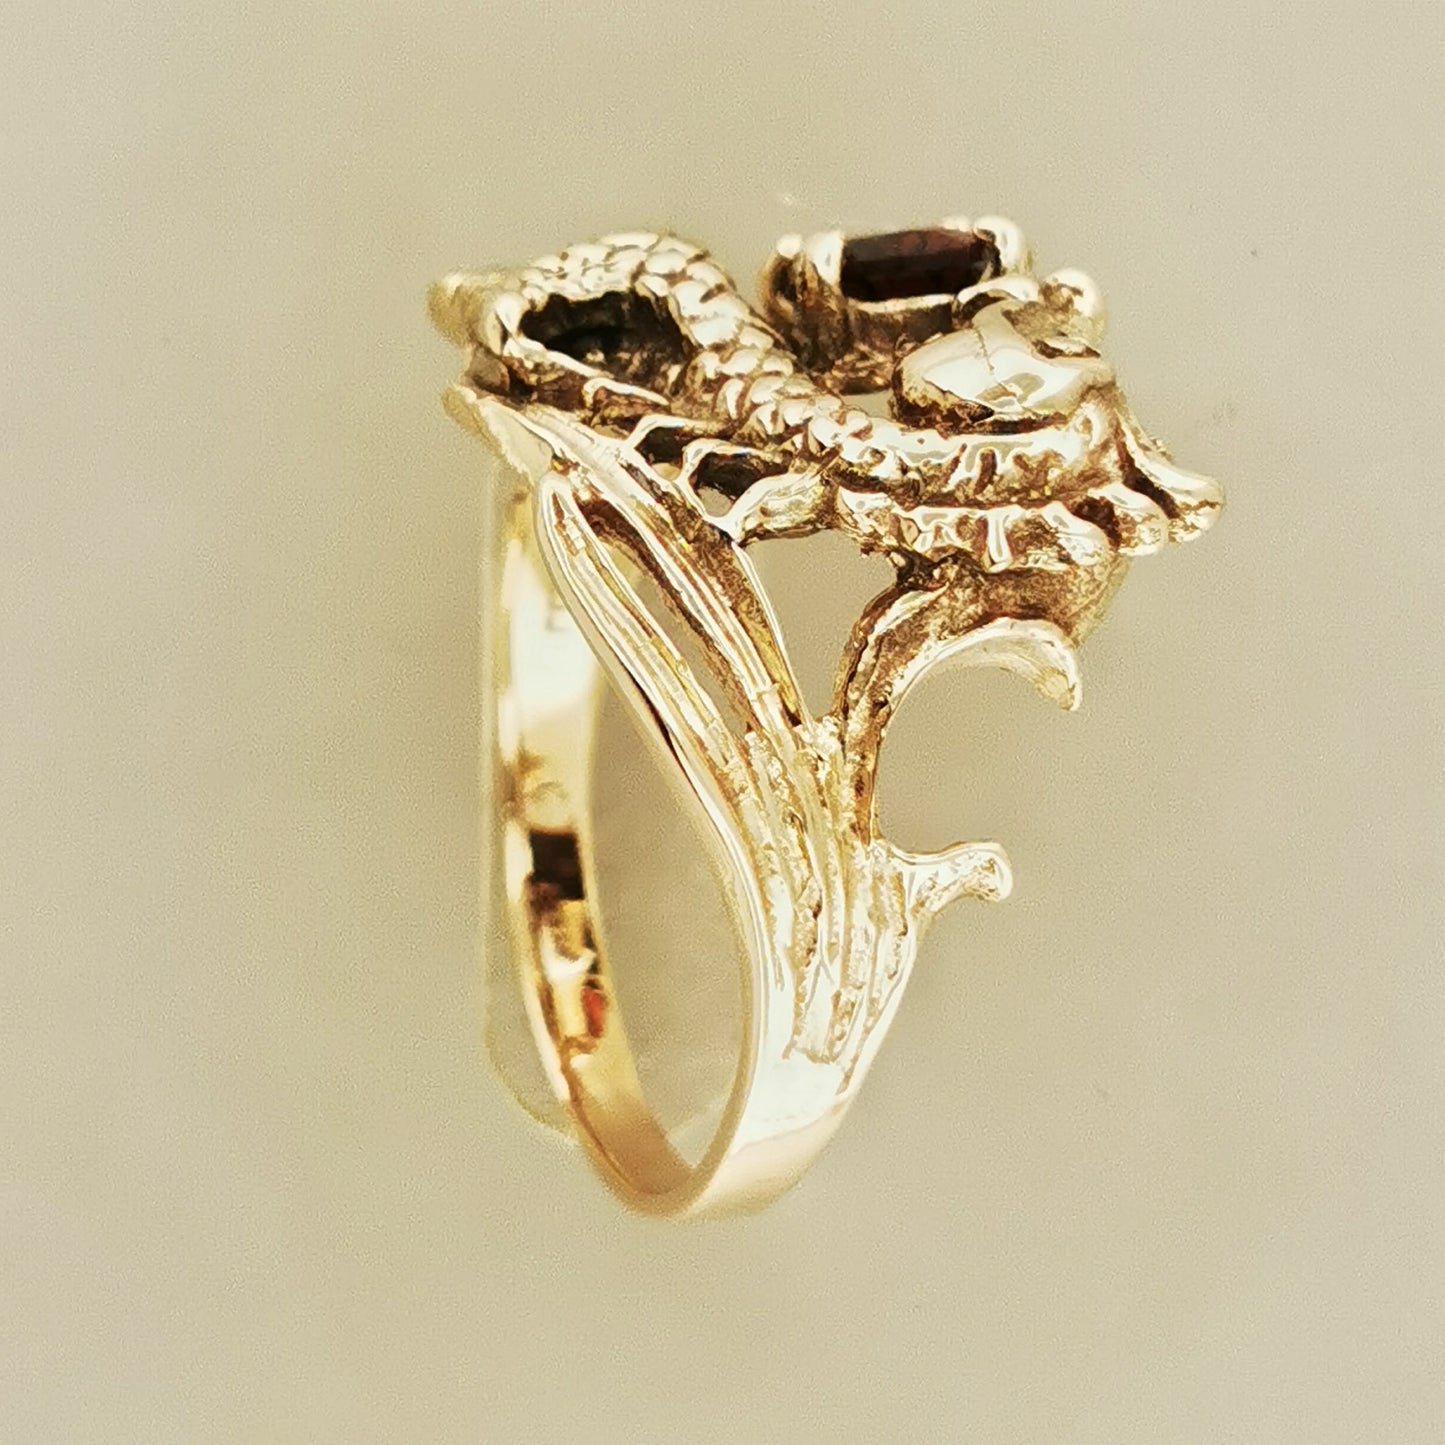 Dragon Ring with Oval Gemstone in Antique Bronze, Birthstone Dragon Ring, Dragon Ring for Him and Her, Bronze Dragon Jewellery, Unisex Dragon Ring, Gemstone Dragon Ring, Vintage Dragon Ring, Dragon Lover Jewelry, Bronze Dragon Ring